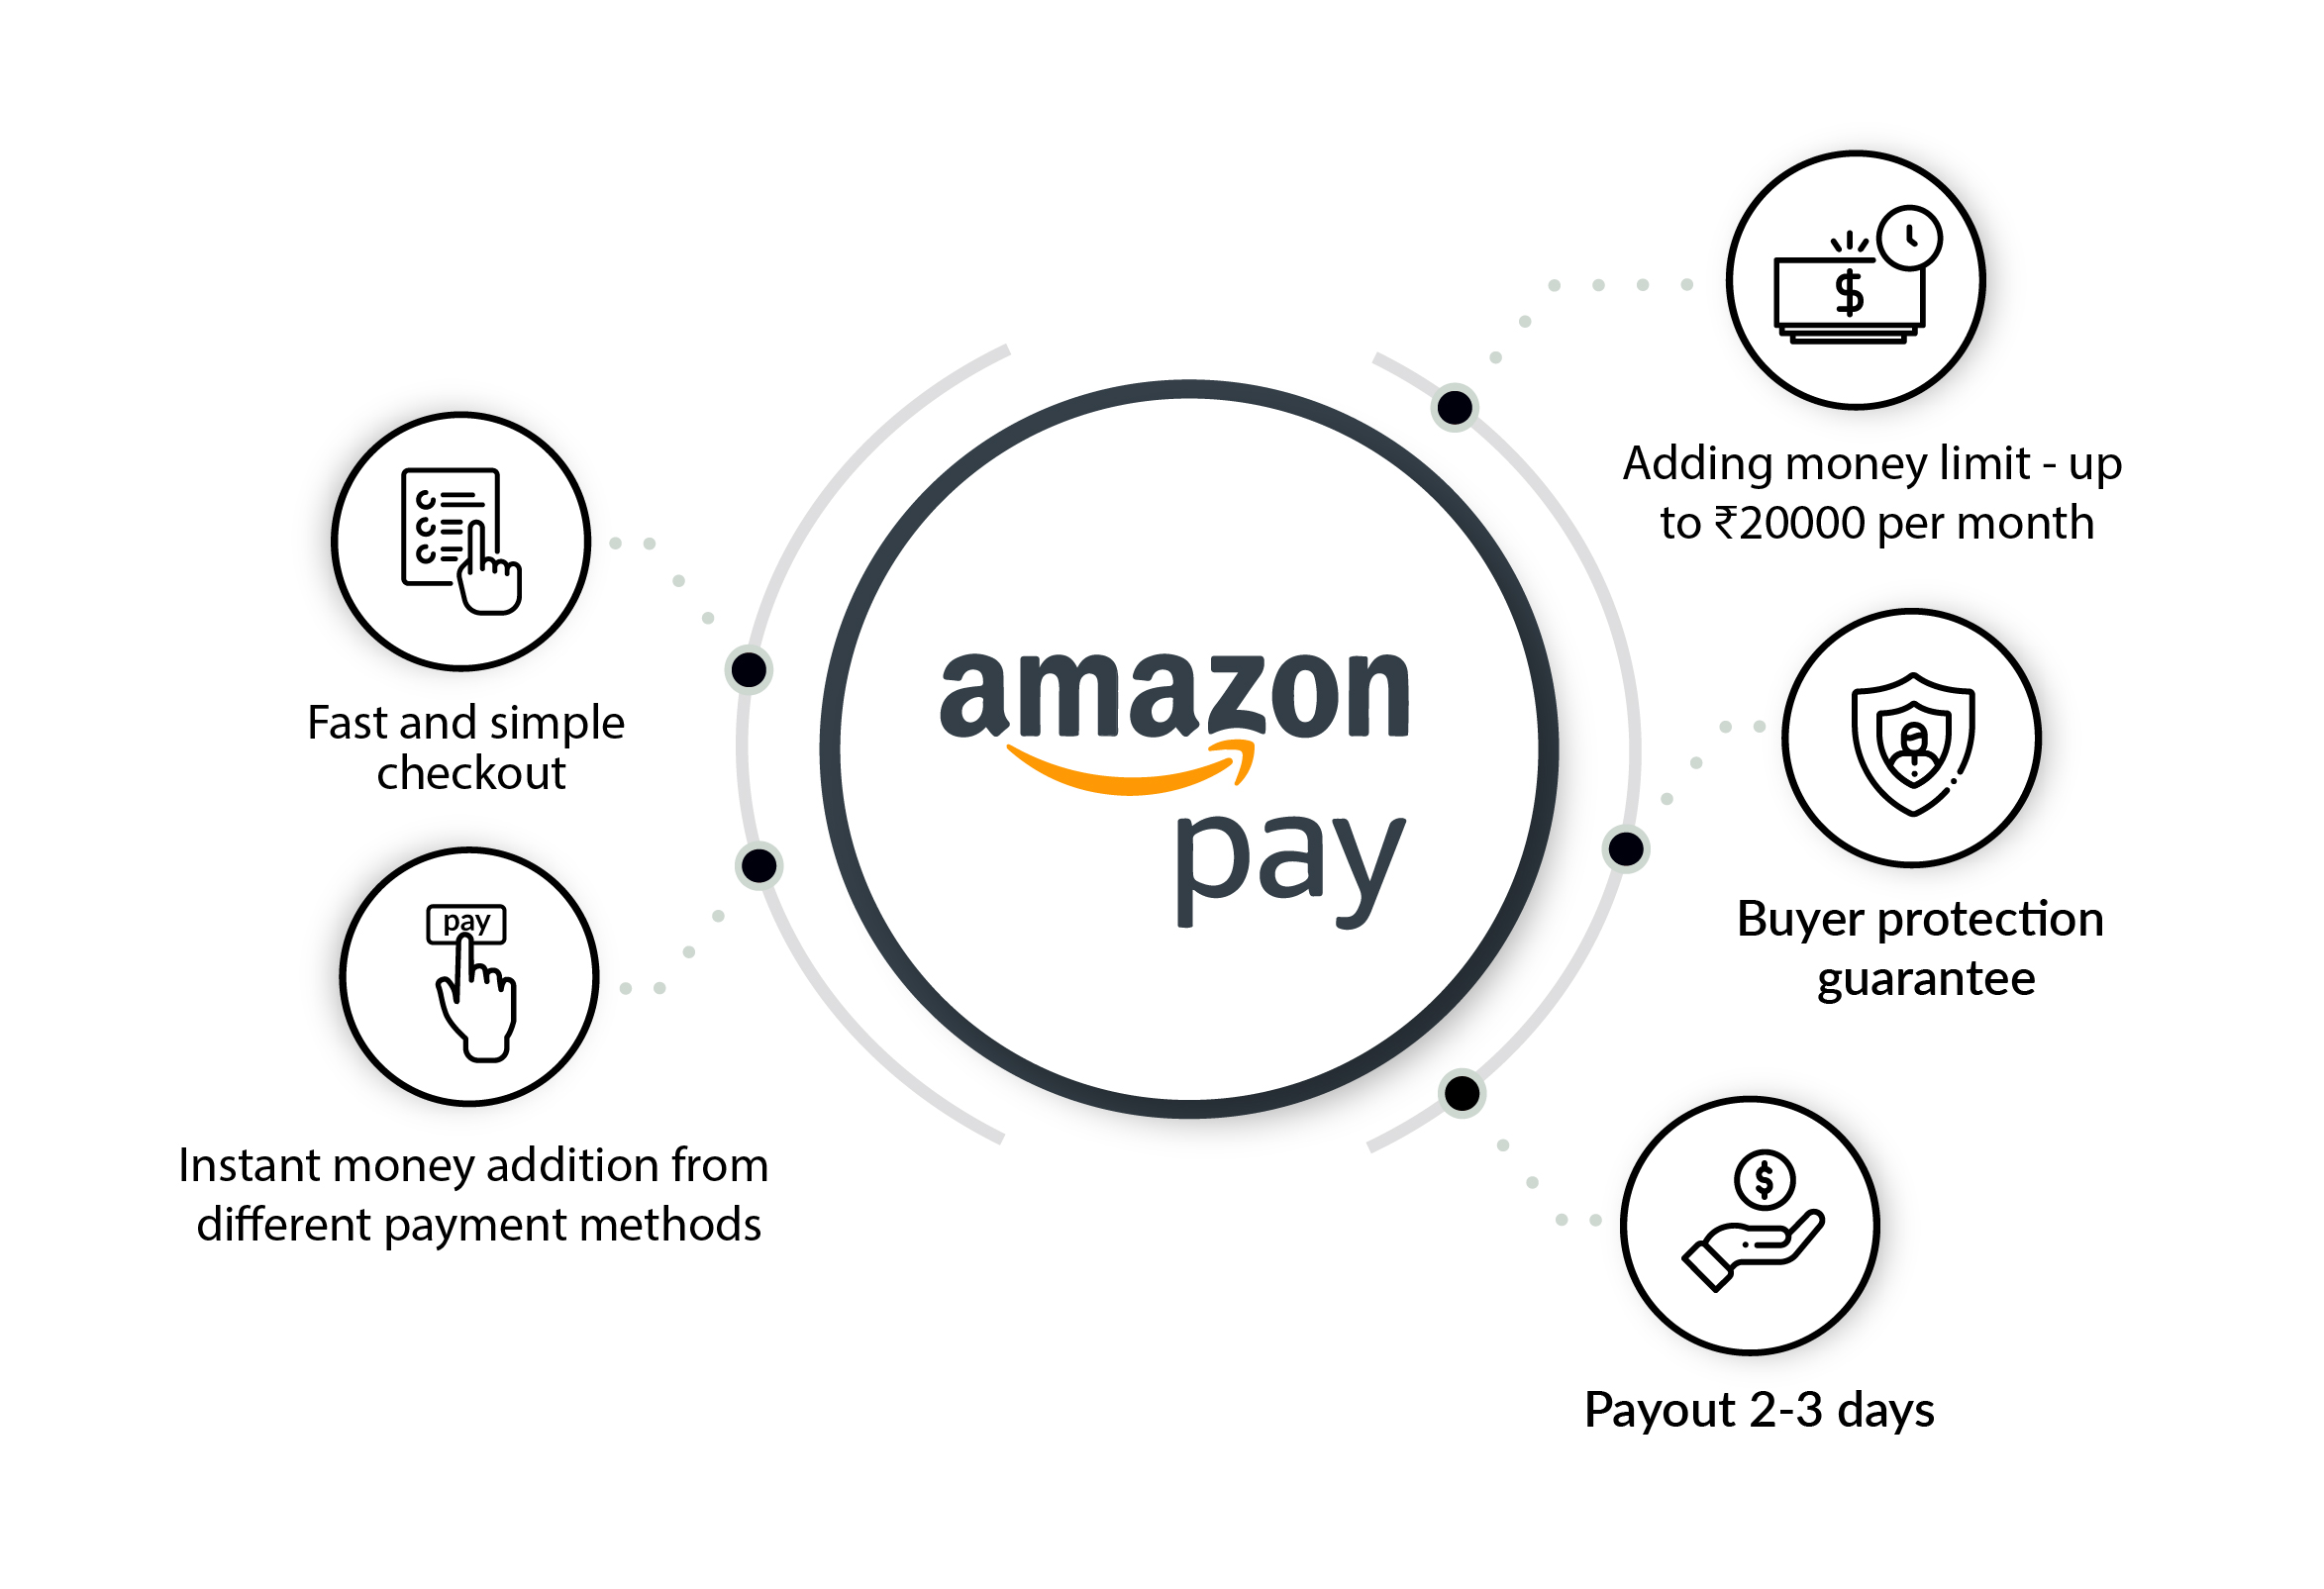 Amazon Pay features